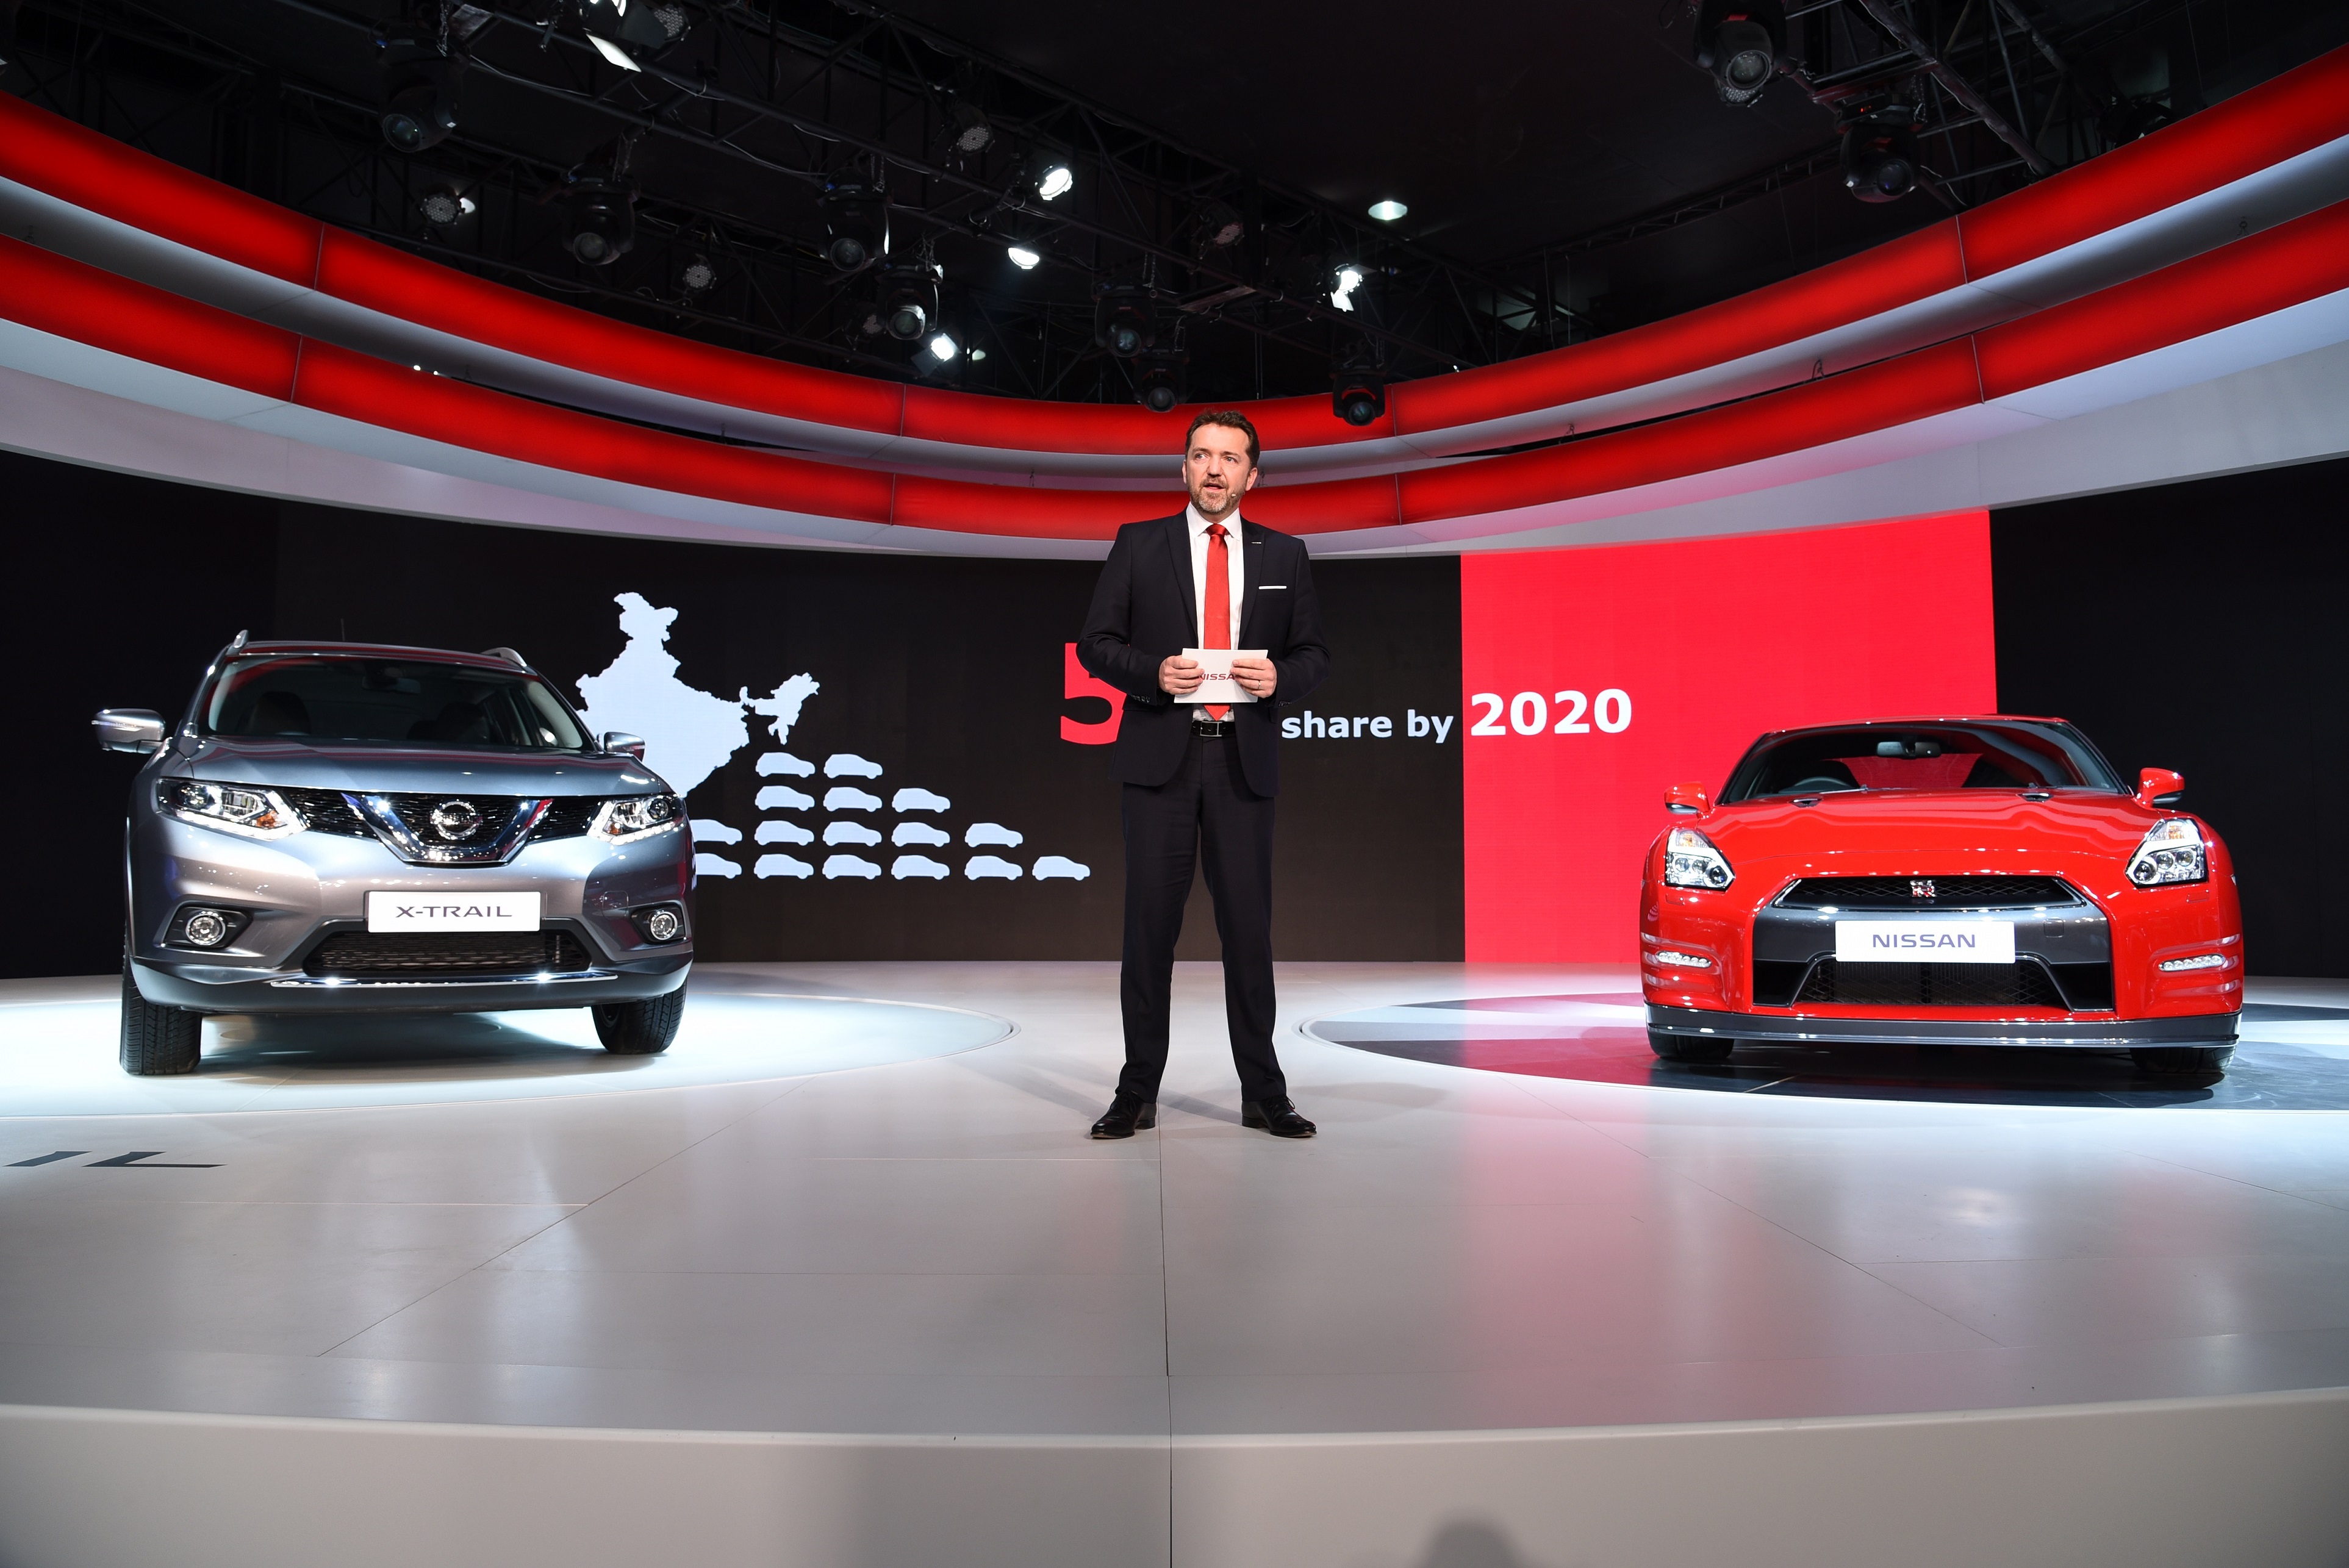 Picture 4 - Guillaume Sicard - President, Nissan India Operations at the shocase of X-Trail and GT-R in India